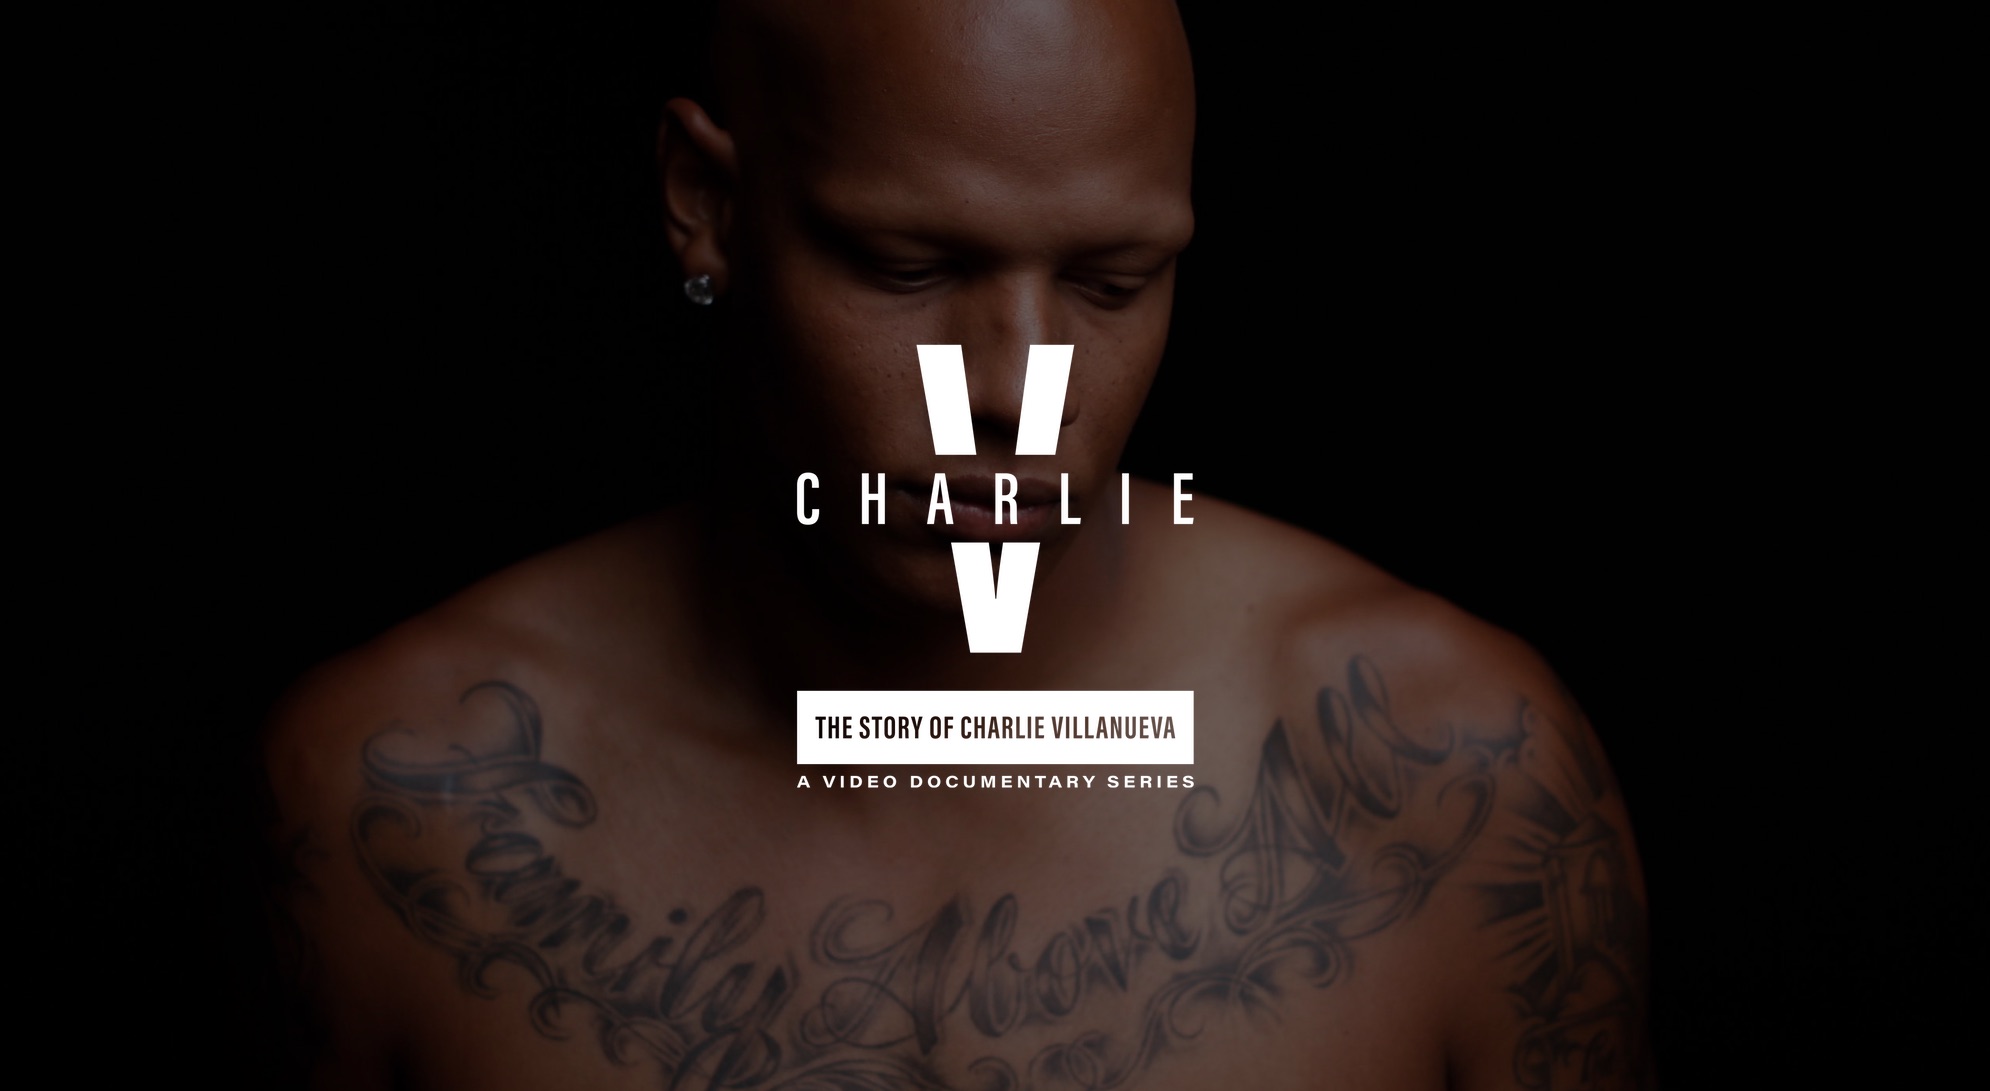 IU C&I Studios Page White Charlie V The Story of Charlie Villanueva A Video Documentary Series Logo with background of bald African American male looking down sporting a tattoo across his chest that reads "Family Above All". He also has an earring on his right ear